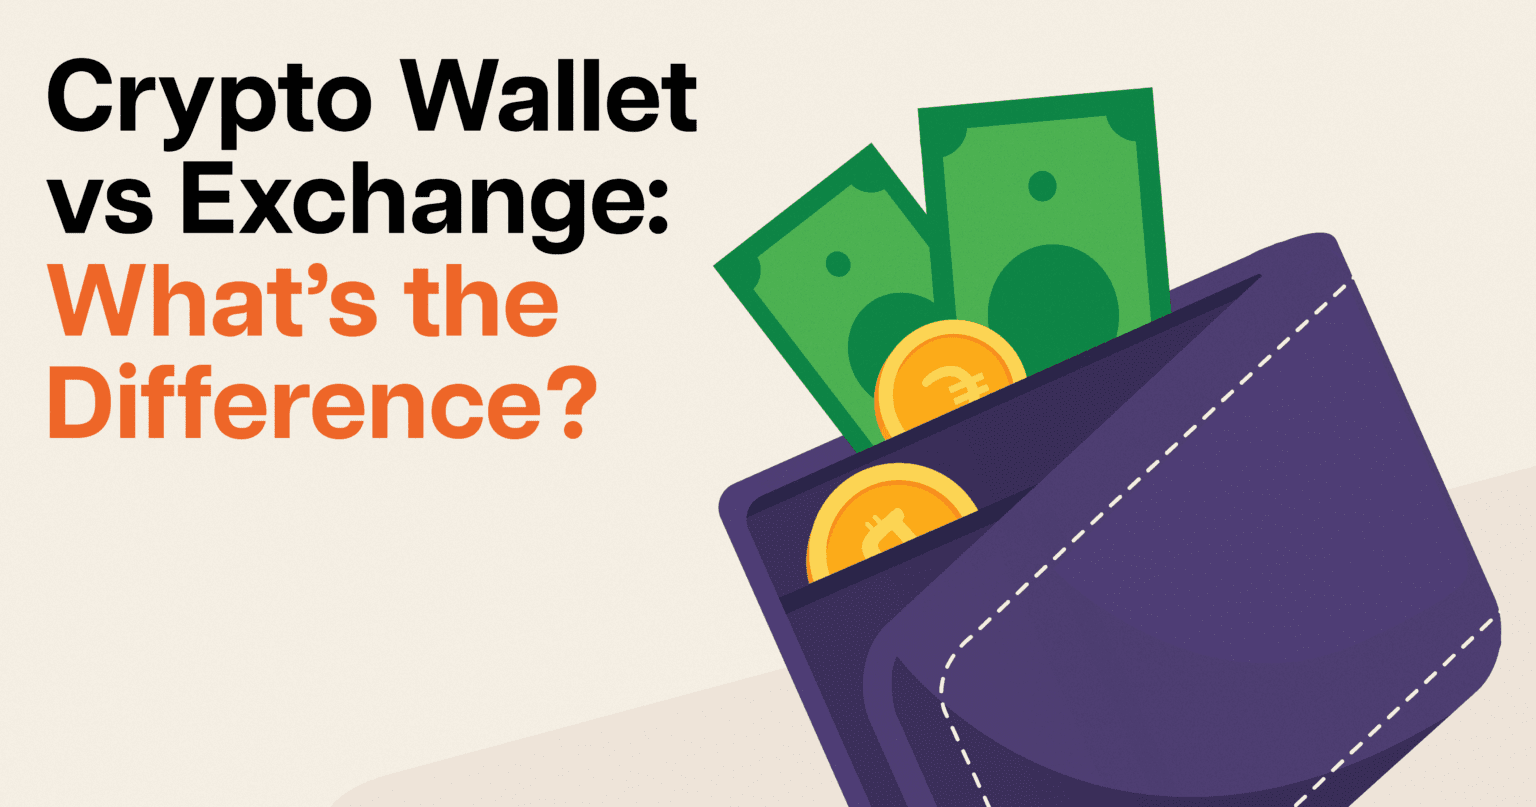 Crypto Wallet vs Exchange: What's the Difference?